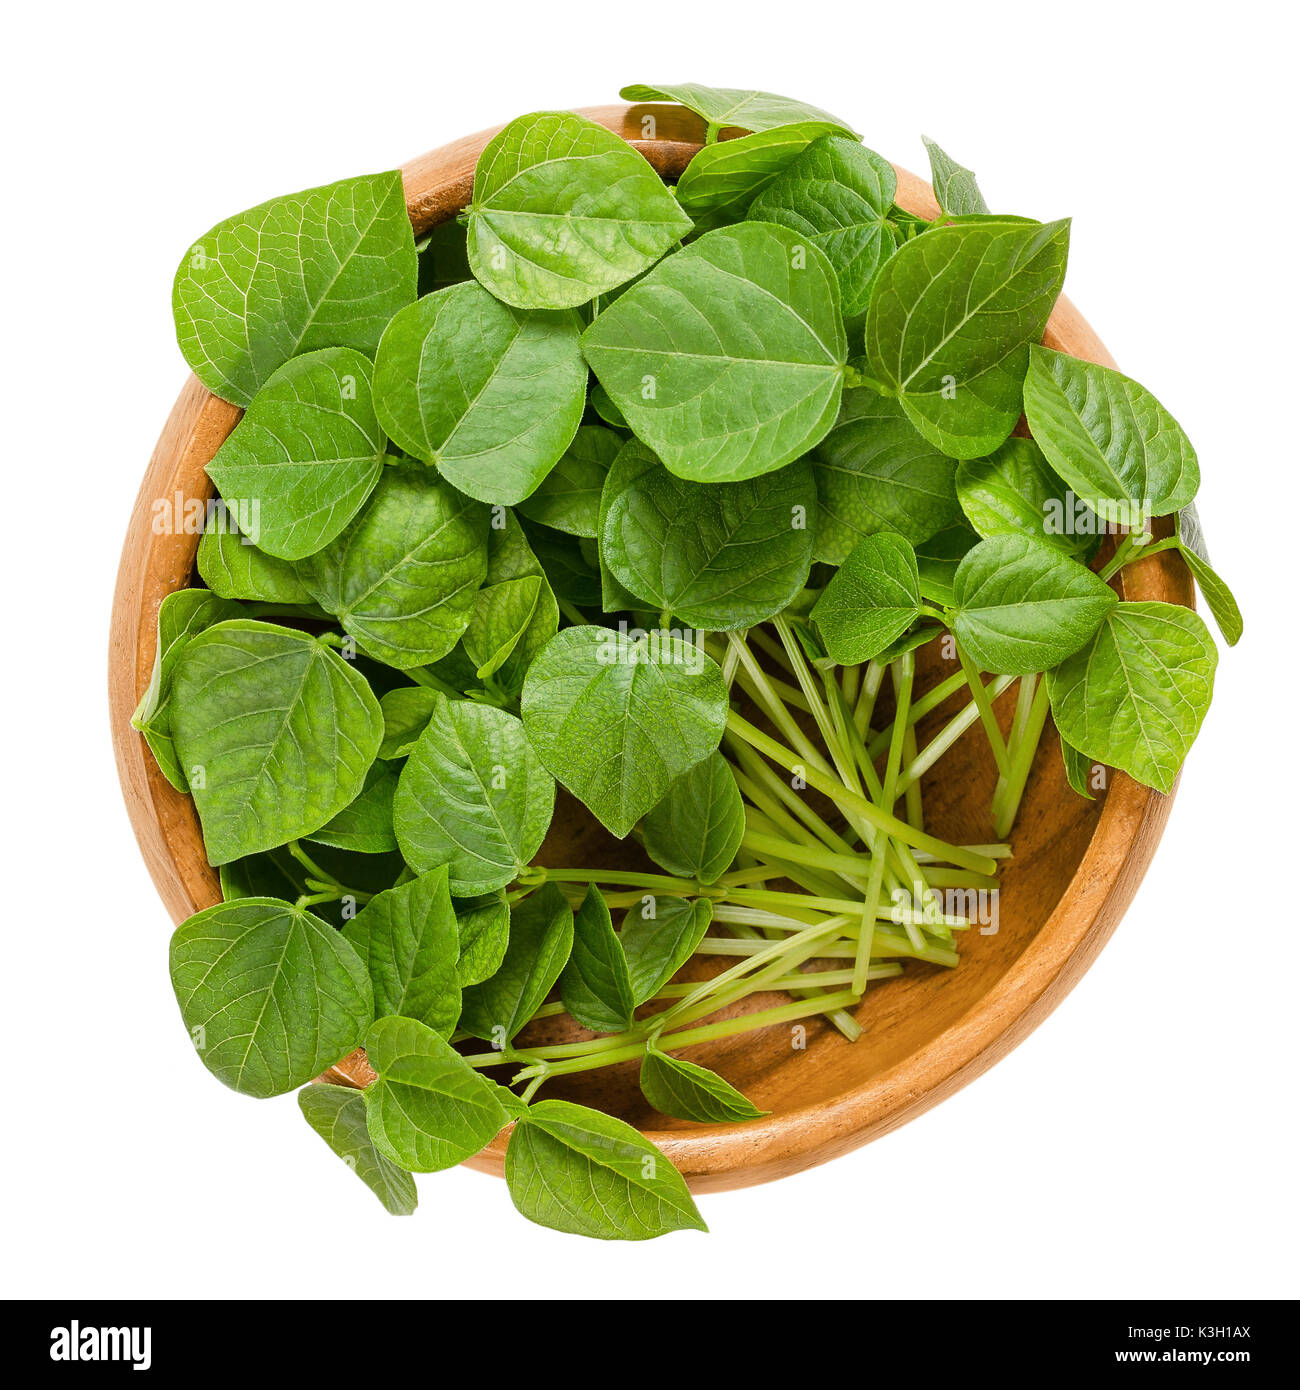 Adzuki bean microgreens in wooden bowl. Cotyledons of Vigna angularis, also called azuki, aduki or Red Mung Bean. Young plants, seedlings and sprouts. Stock Photo